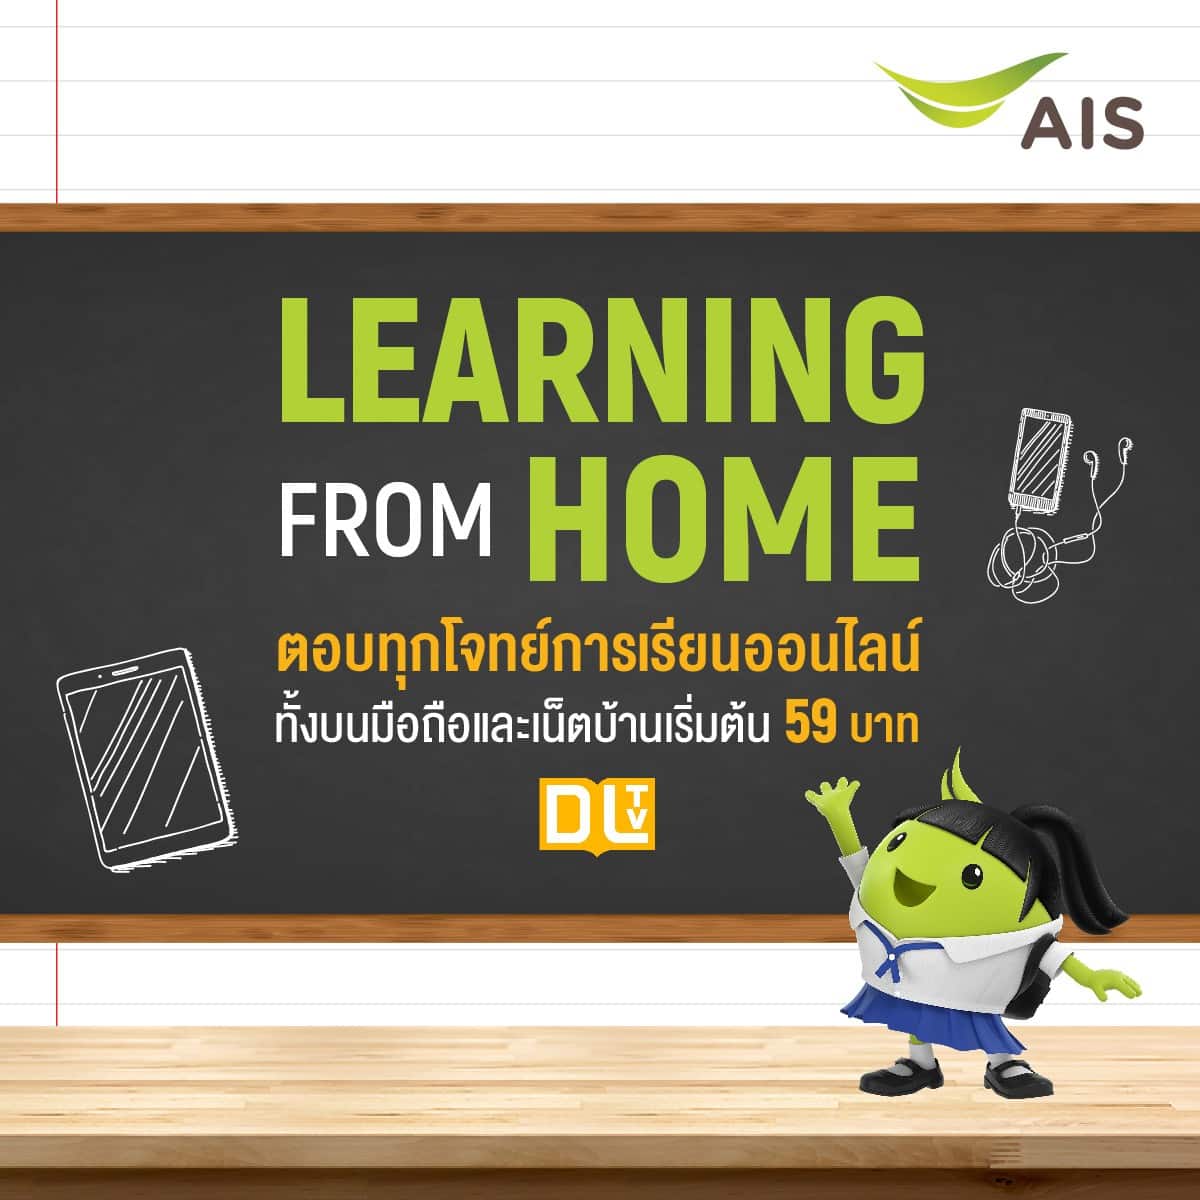 - AIS learningfromhome 00006 - ภาพที่ 3